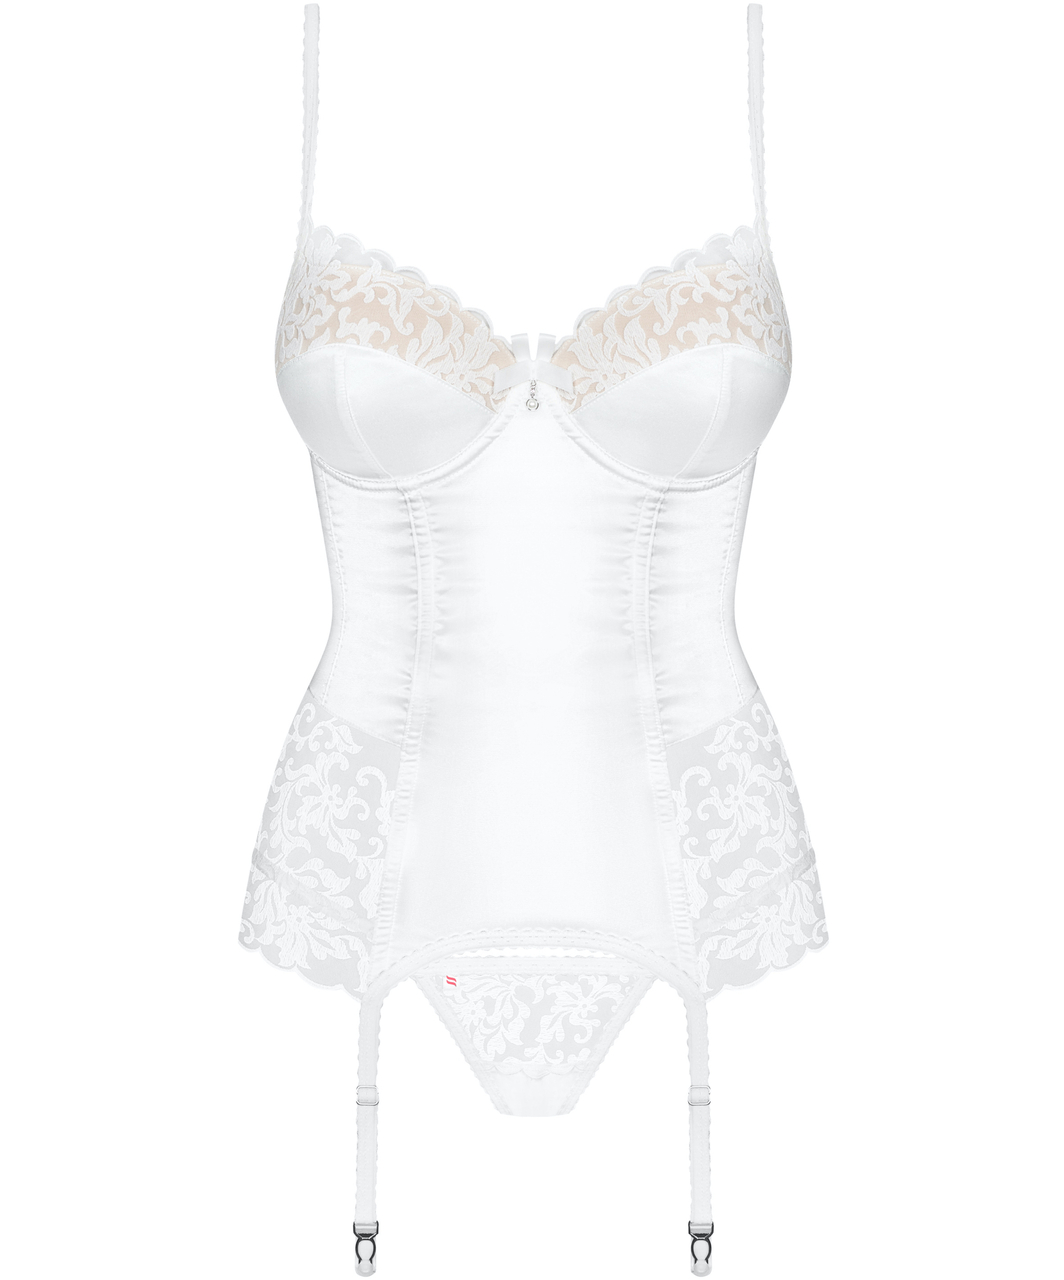 Obsessive white embroidered basque with string